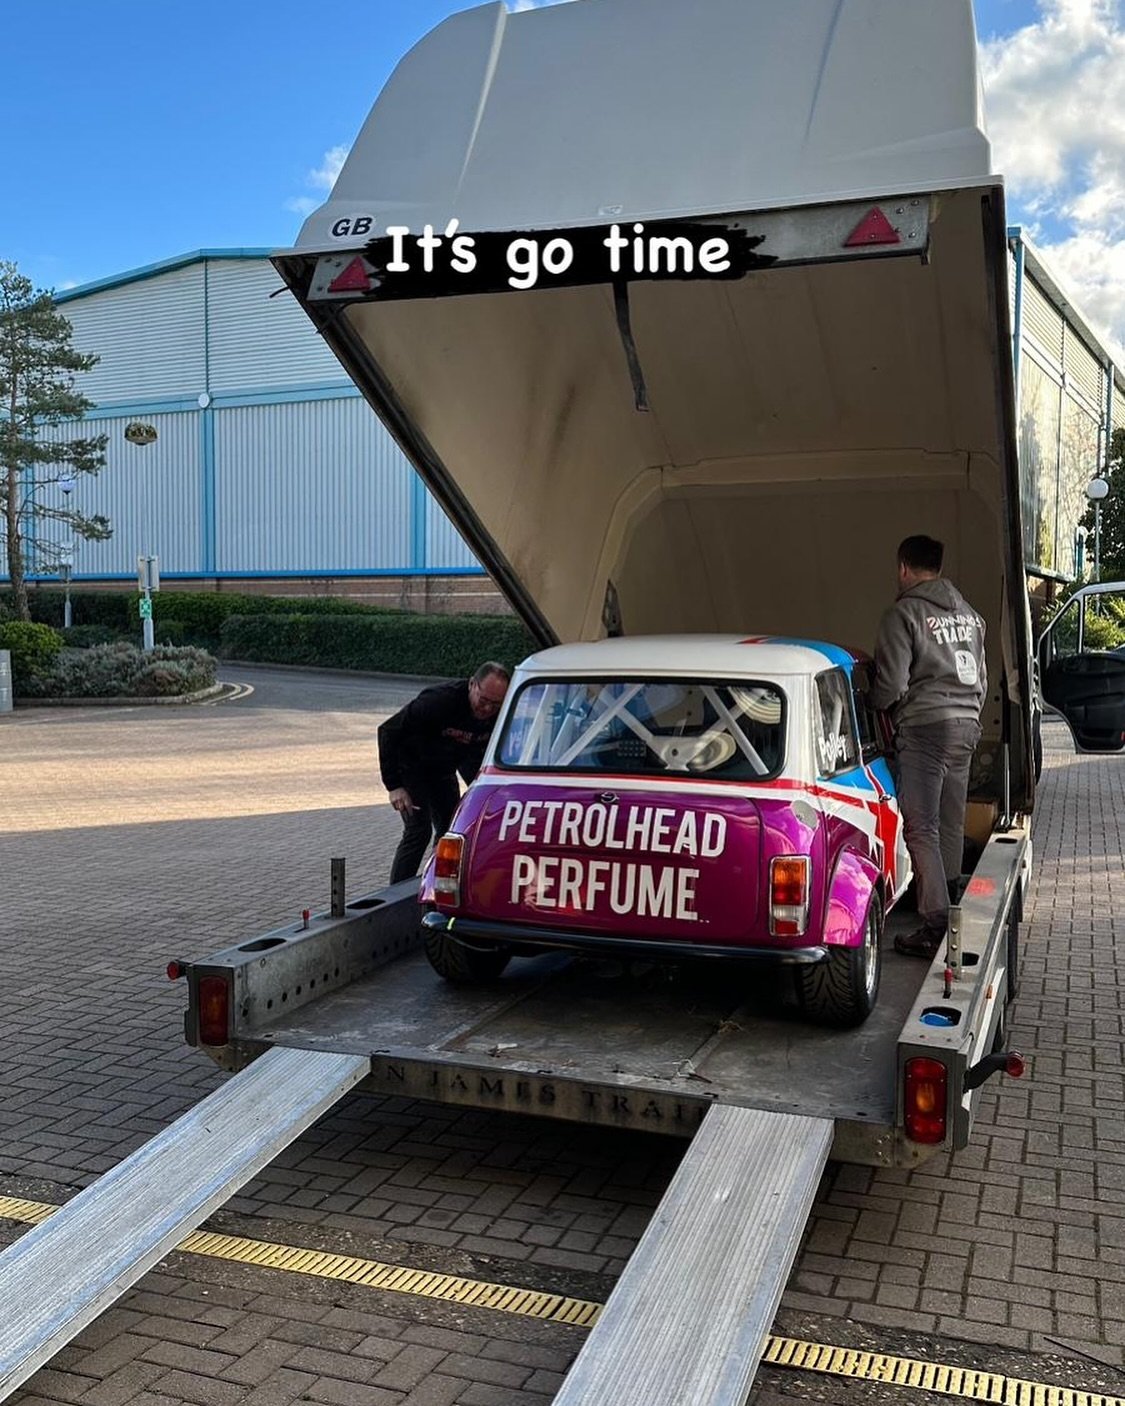 Racing season is upon us! @petrolheadperfume springs into action on Good Friday and Easter Saturday @doningtonpark with @jopolley76 in her awesome new look Mini Miglia!
 
We simply cant wait! 🏎️🌸💪🏻

#sendit #gotime #writeyourownrules #womeninmoto